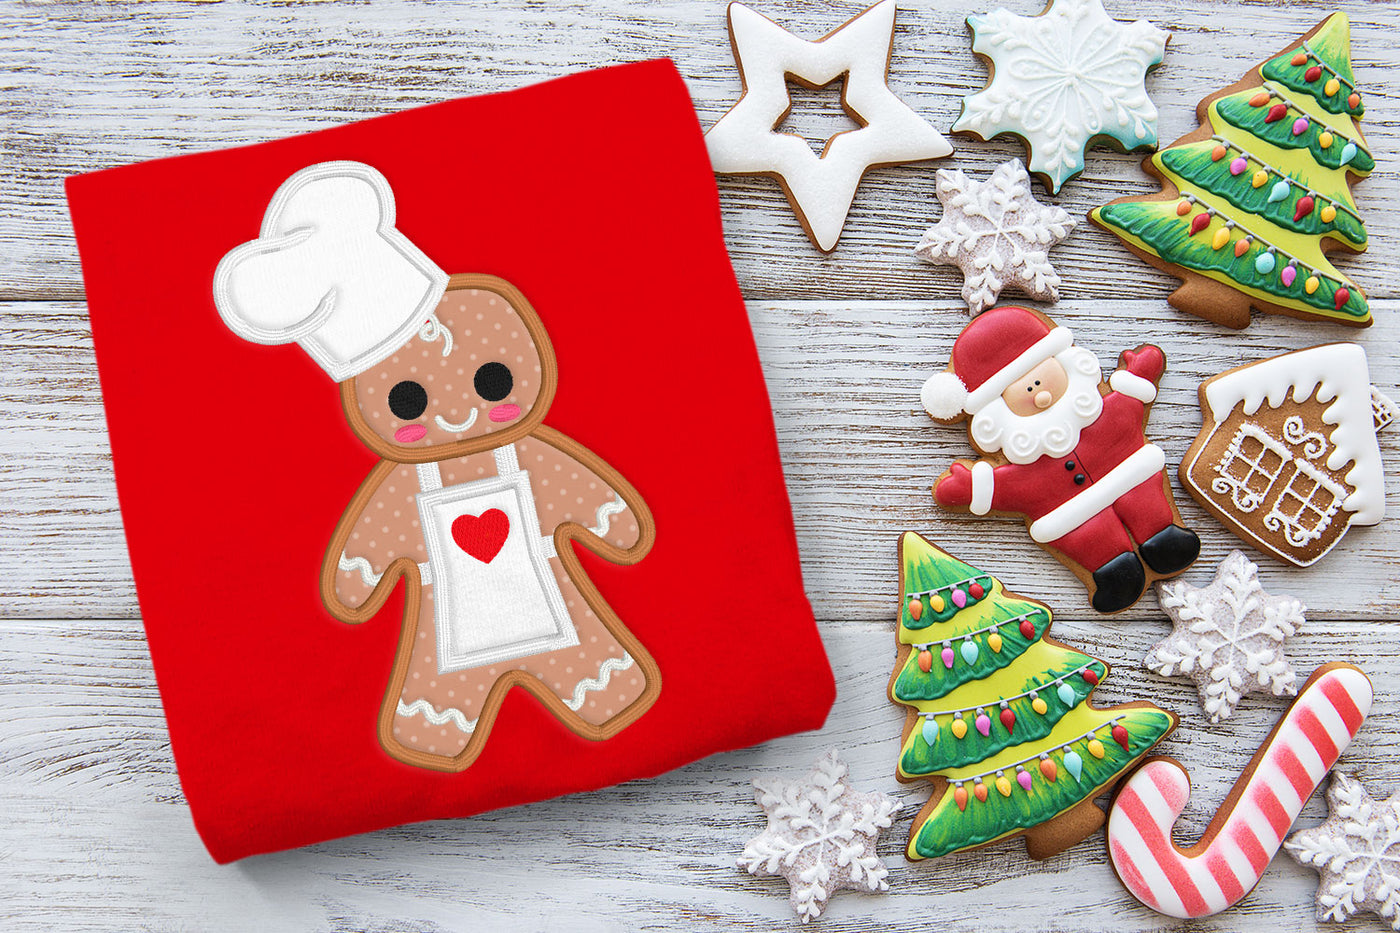 gingerbread baker applique embroidery